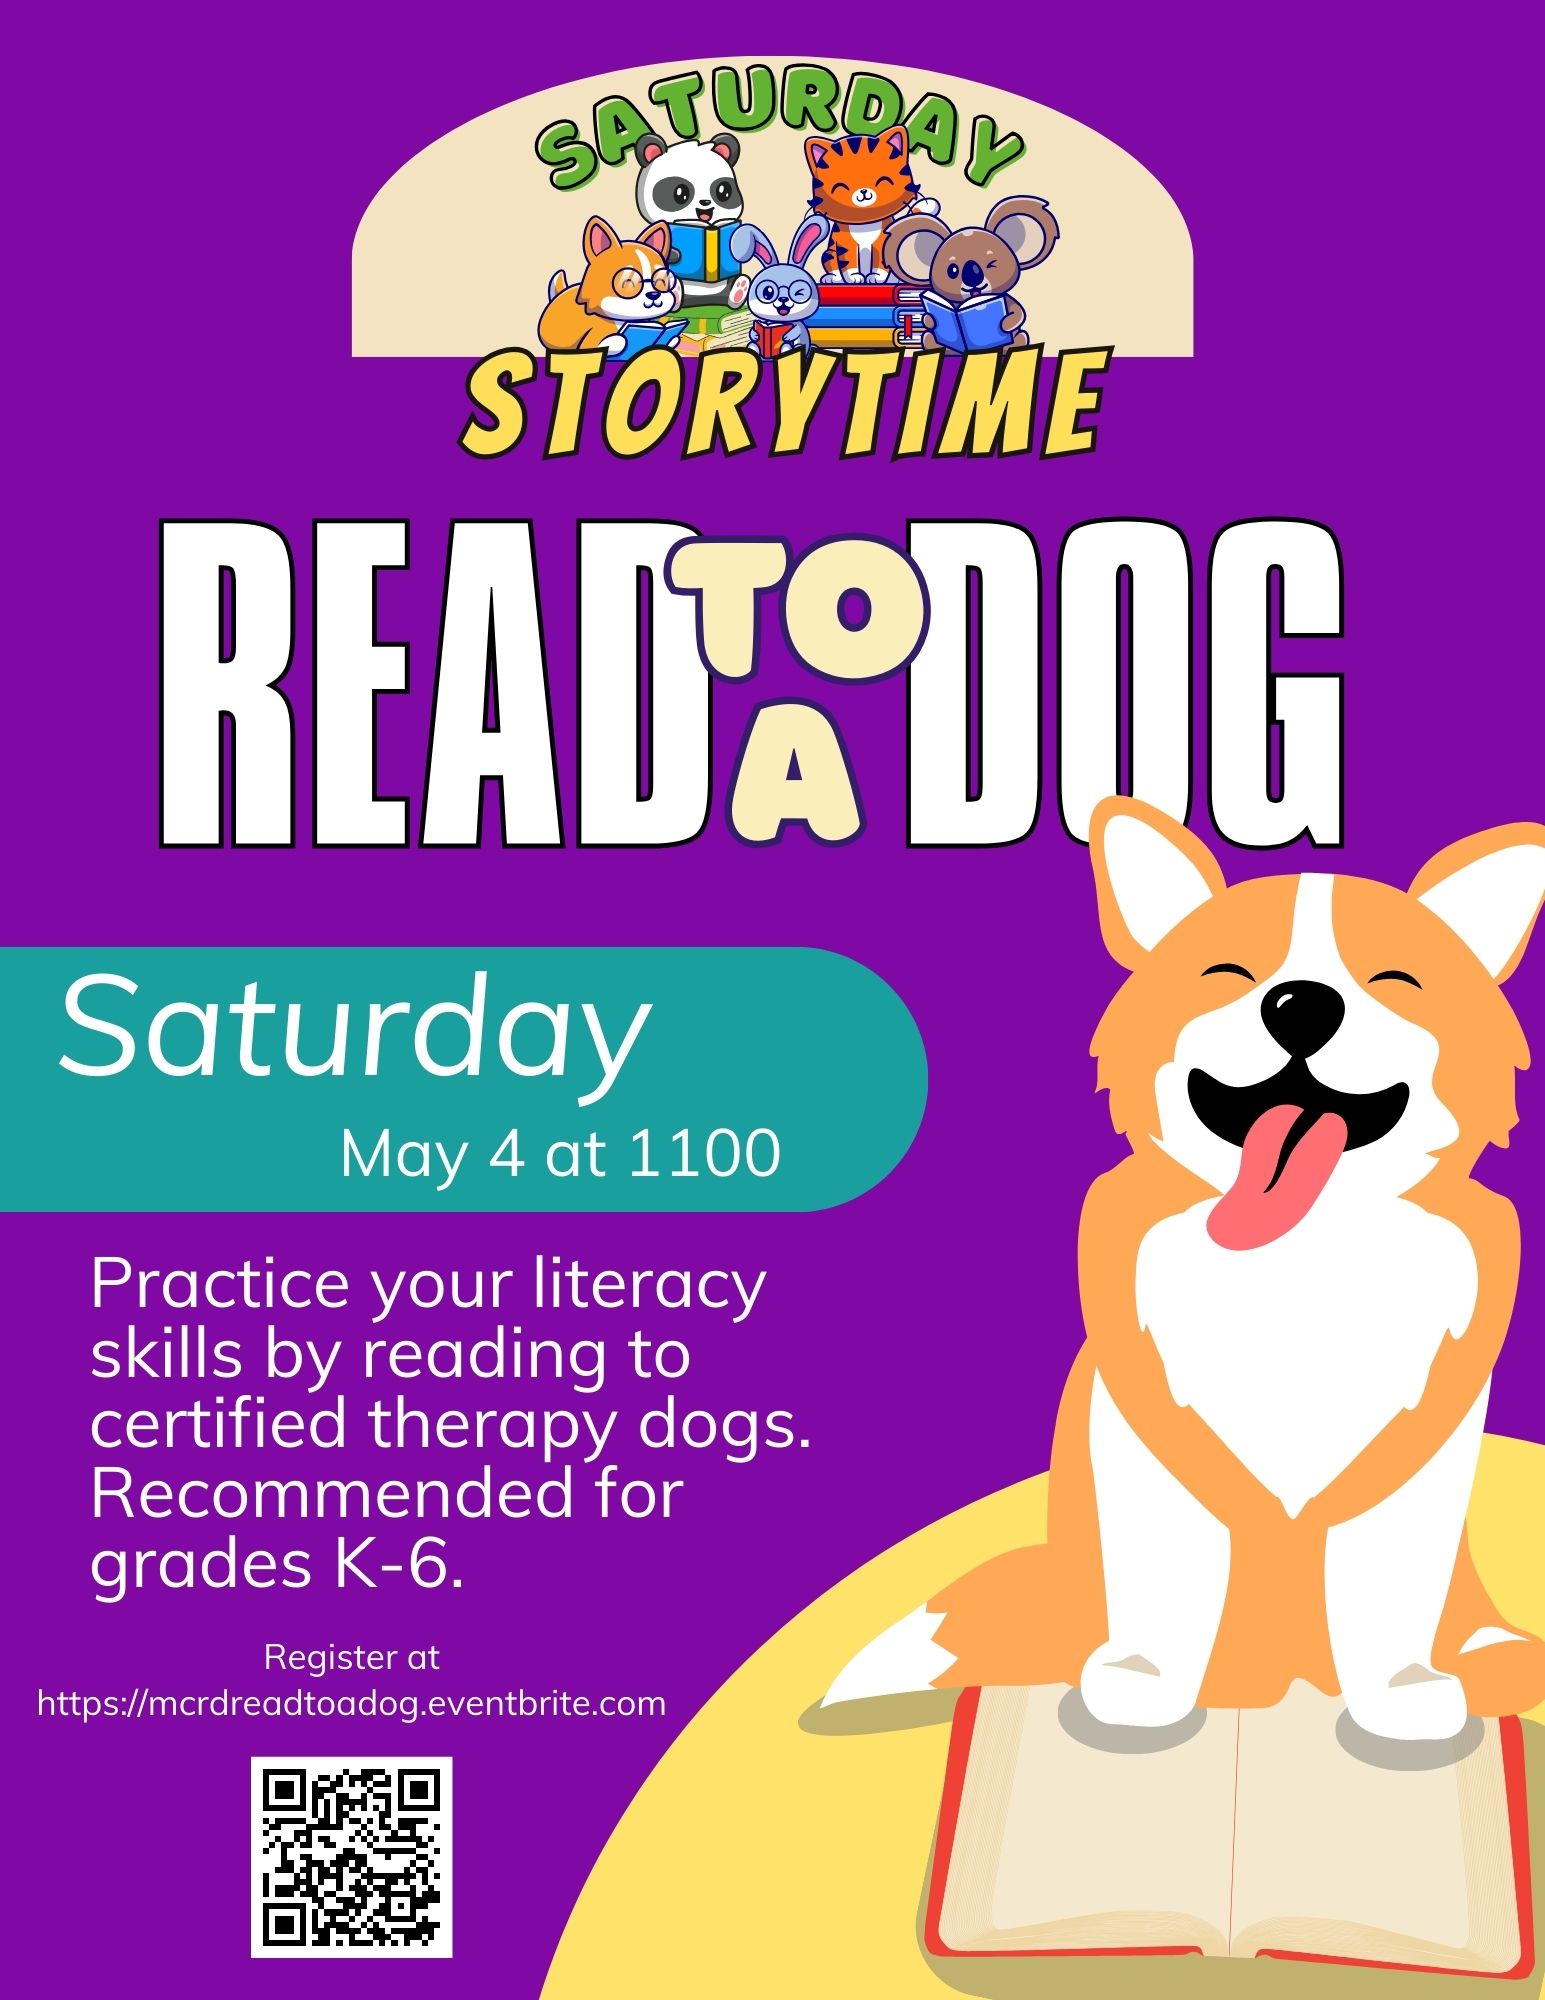 FLYER - Saturday Storytime Read to a Dog.jpg